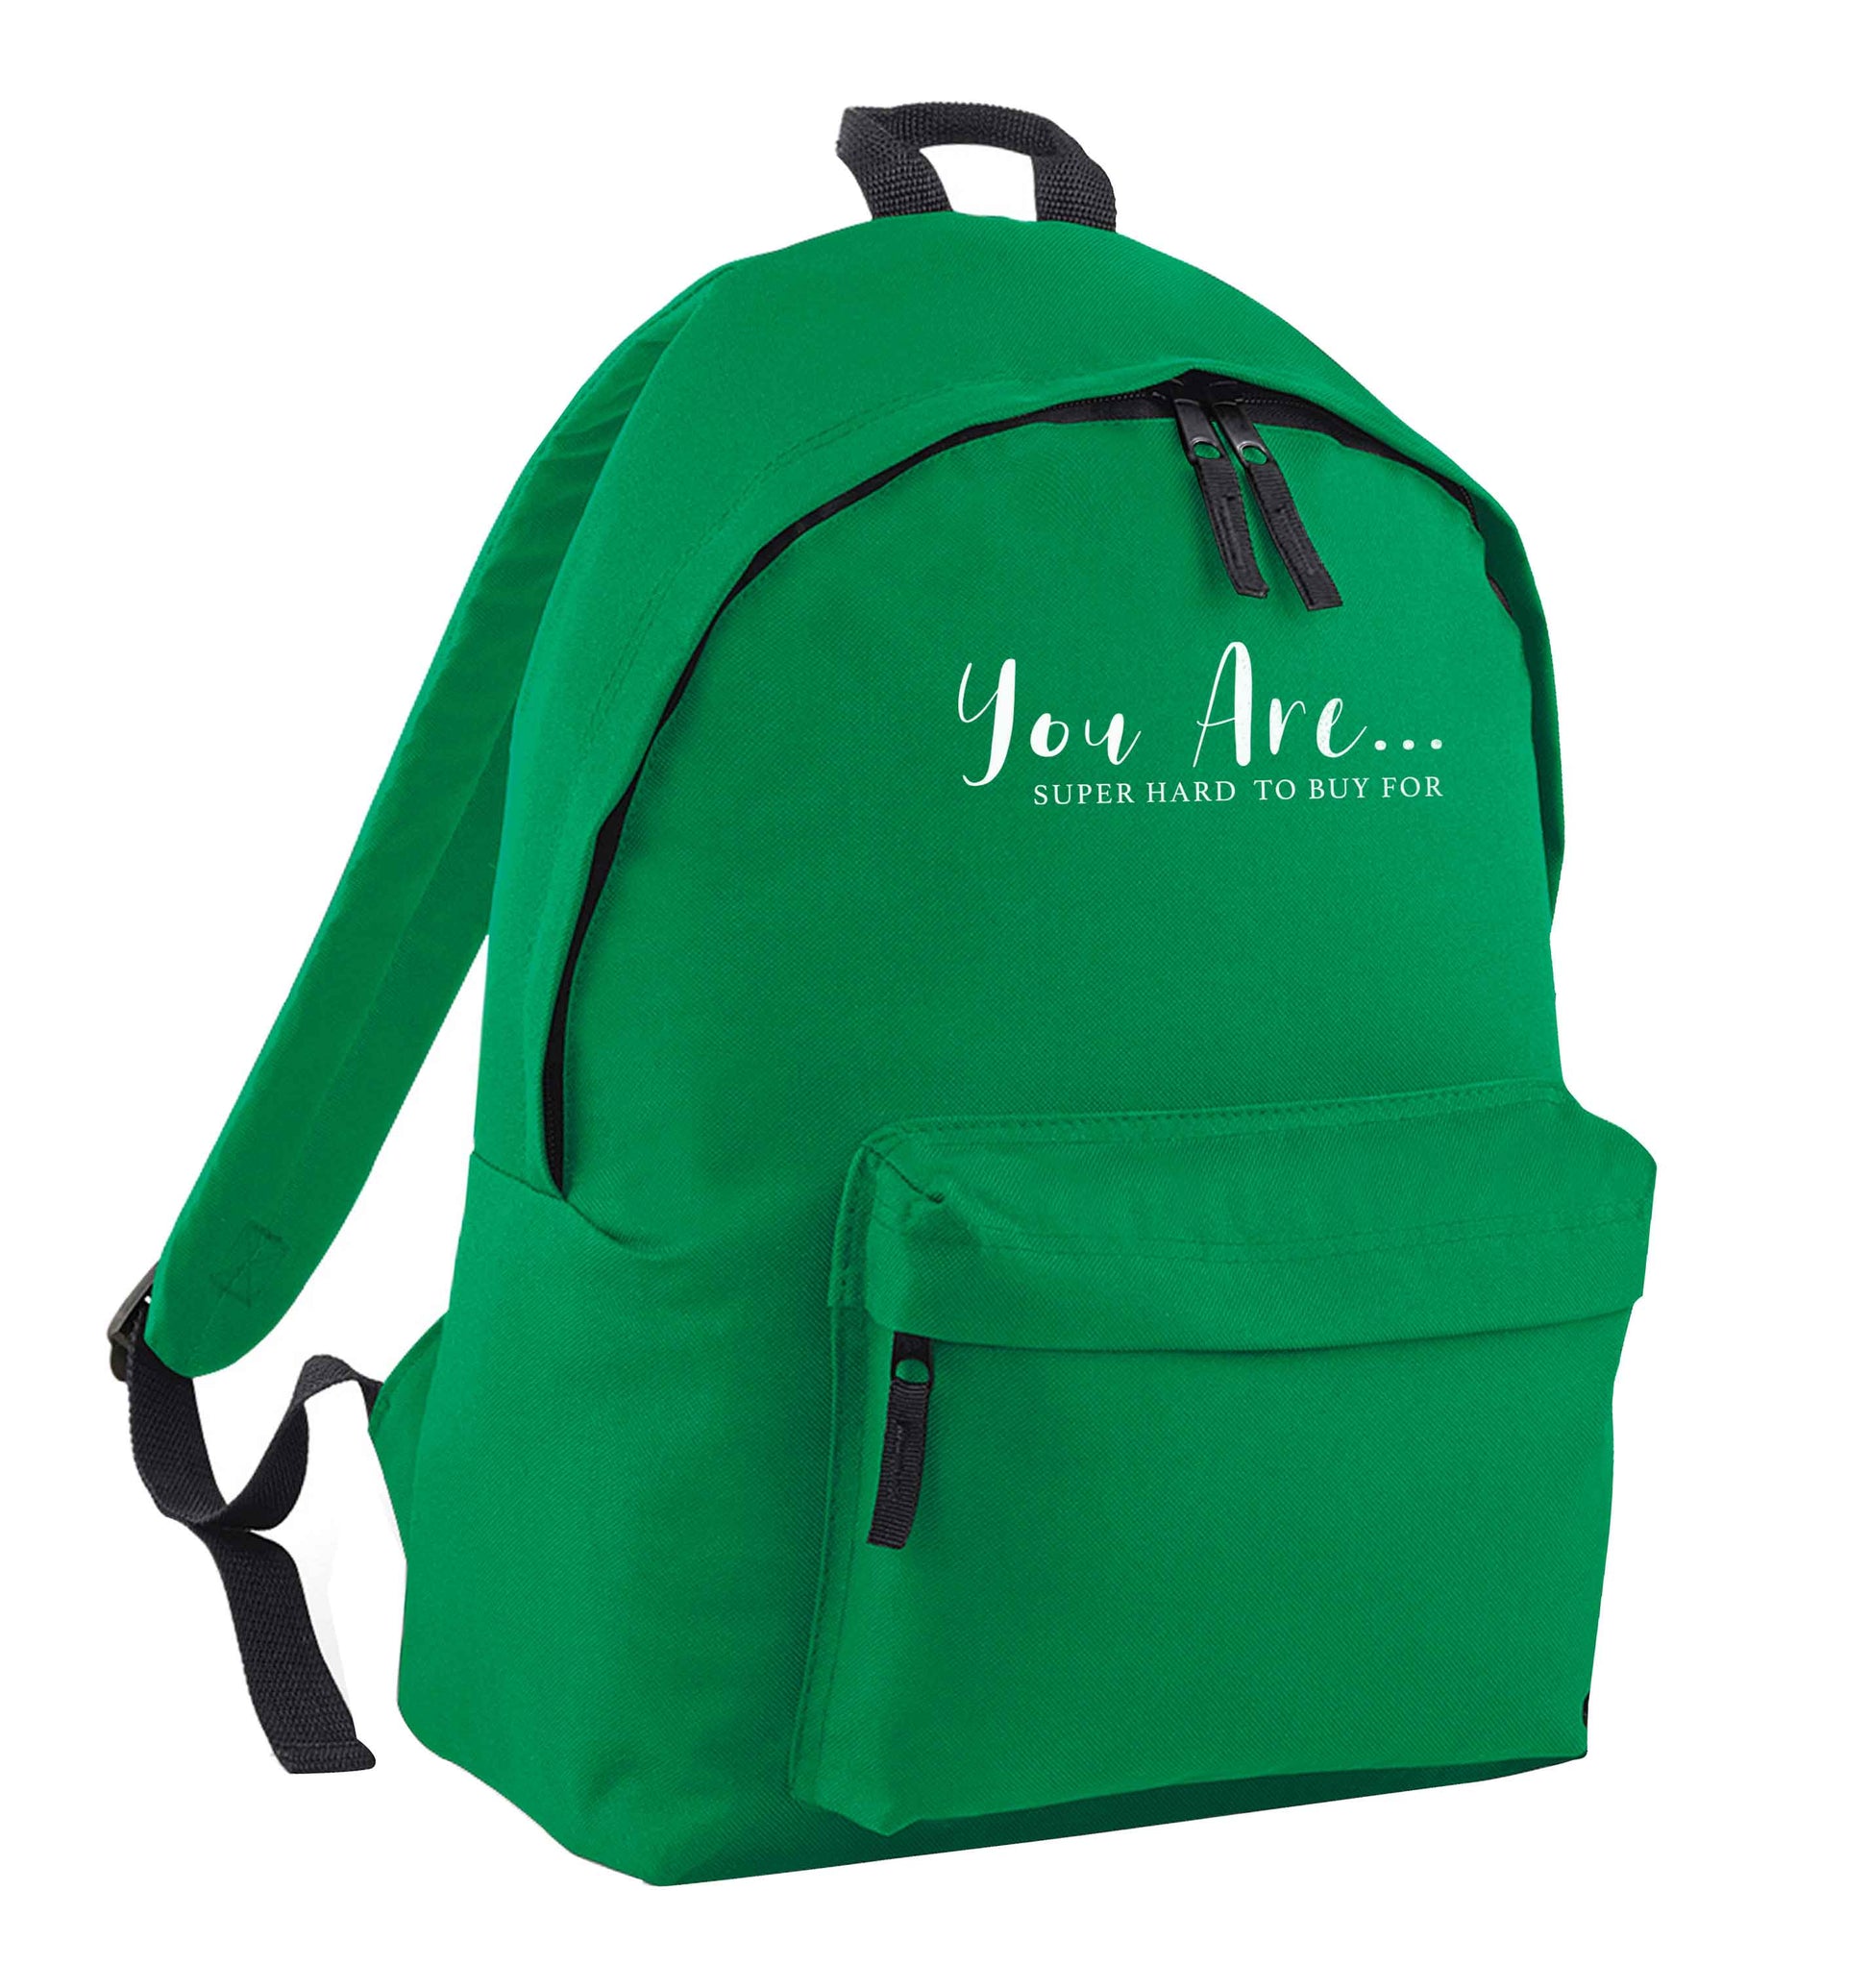 You are super hard to buy for green adults backpack